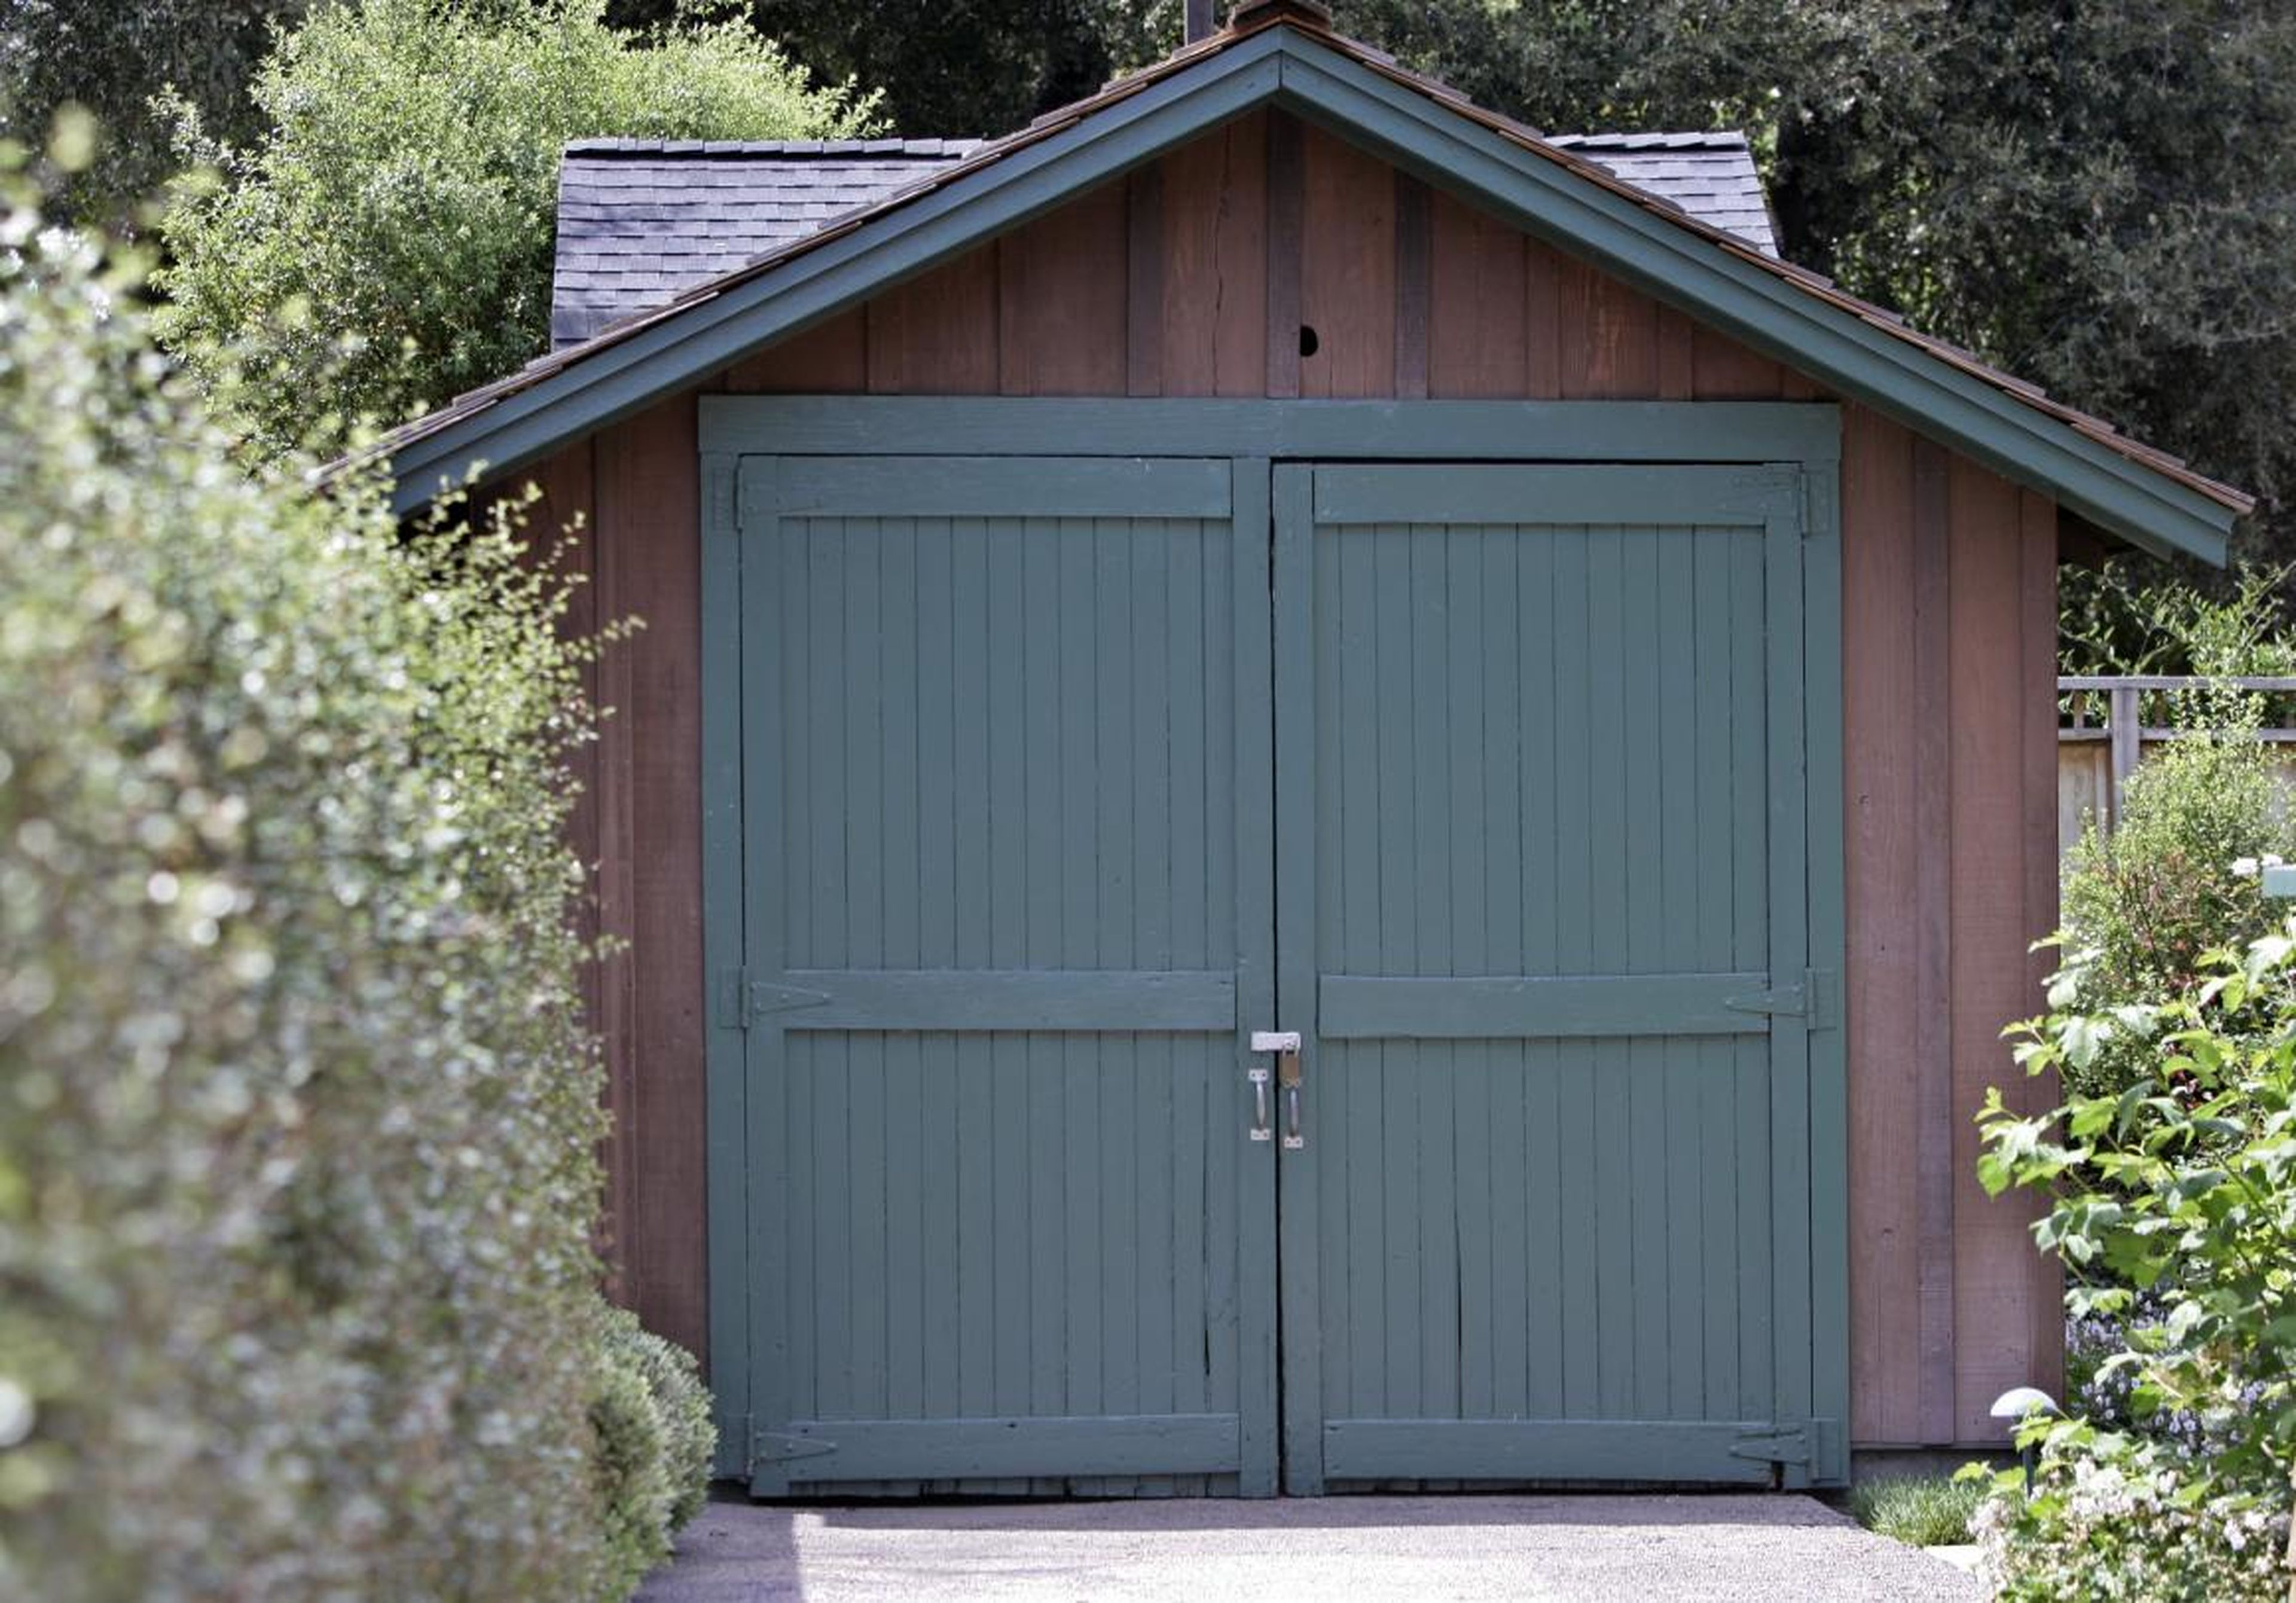 3. More than 80 years ago, Bill Hewlett and David Packard founded HP in Packard's garage in Palo Alto. It was designated a historic site in 1987, and HP bought the property in 2000 for $1.7 million.